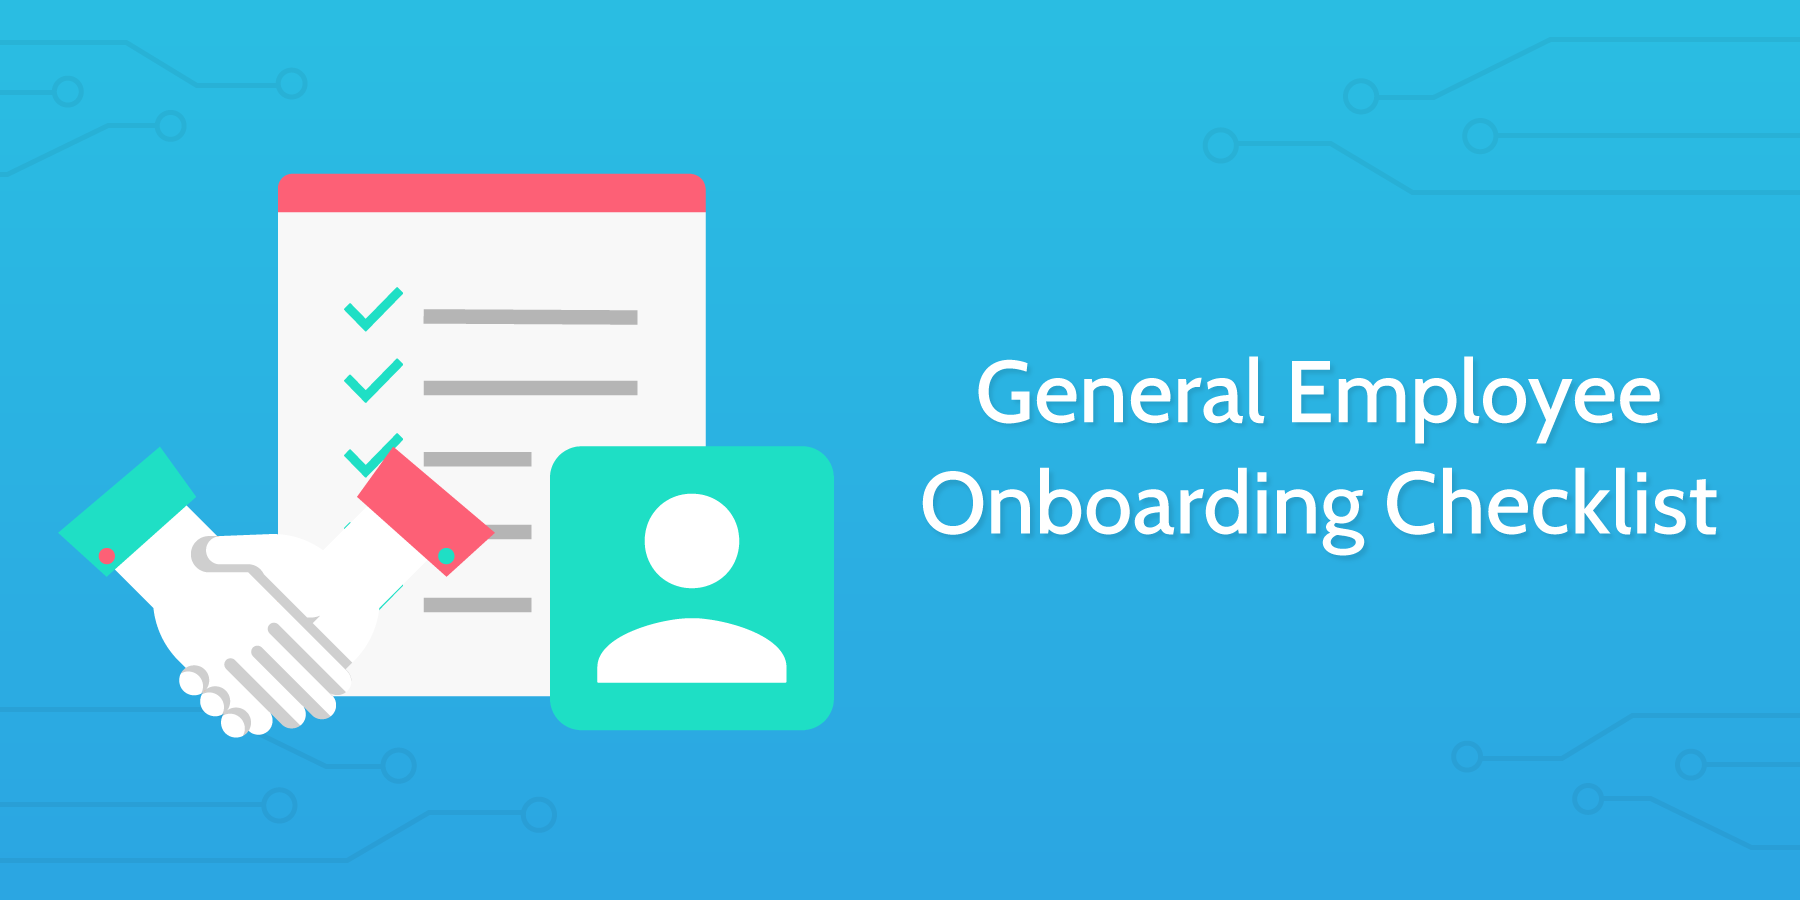 how to conduct an interview General Employee Onboarding Checklist